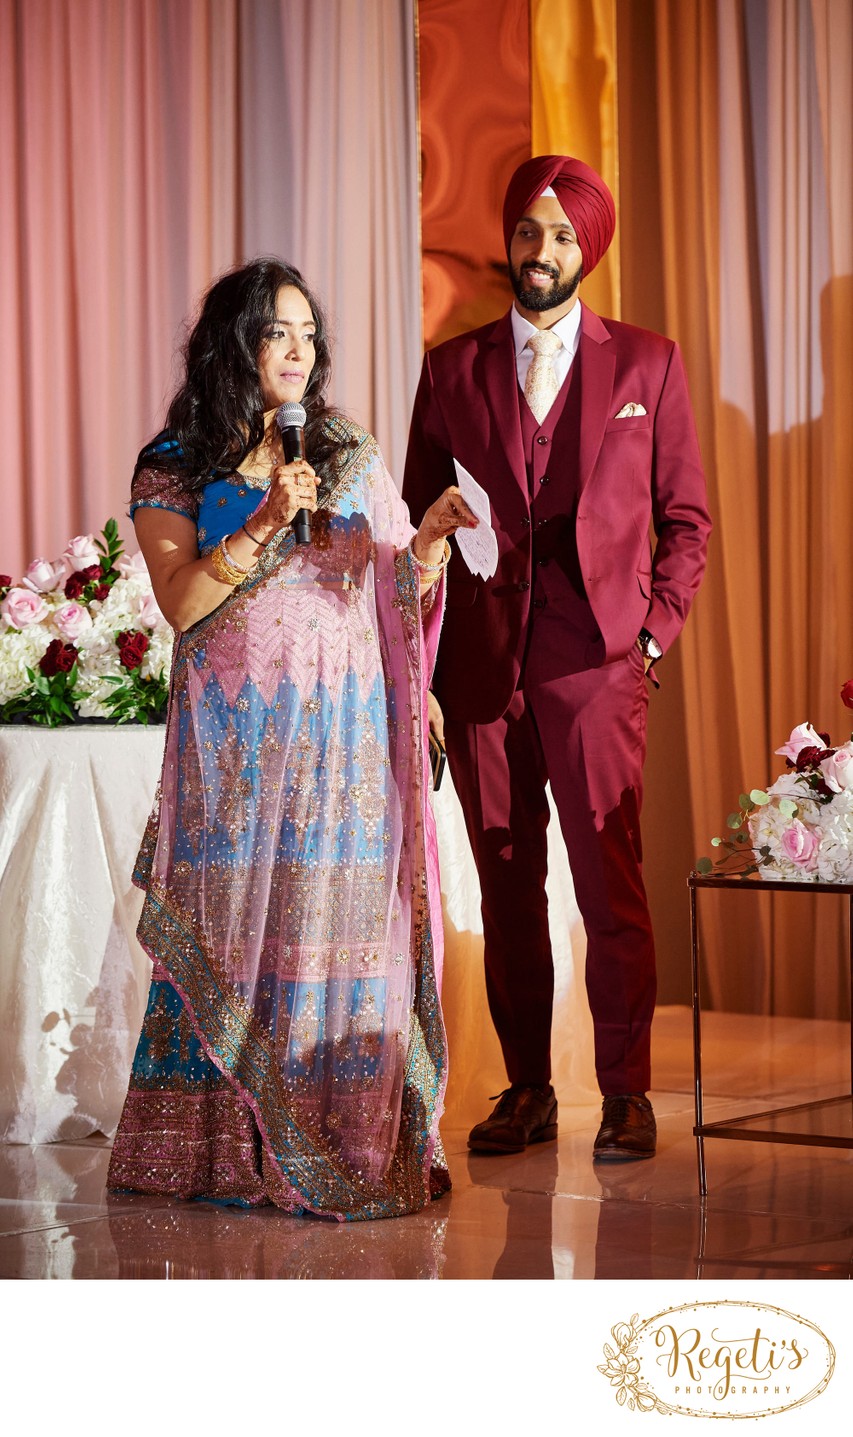 Amit and Lali’s Indian Wedding Reception in Fort Lauderdale, Florida